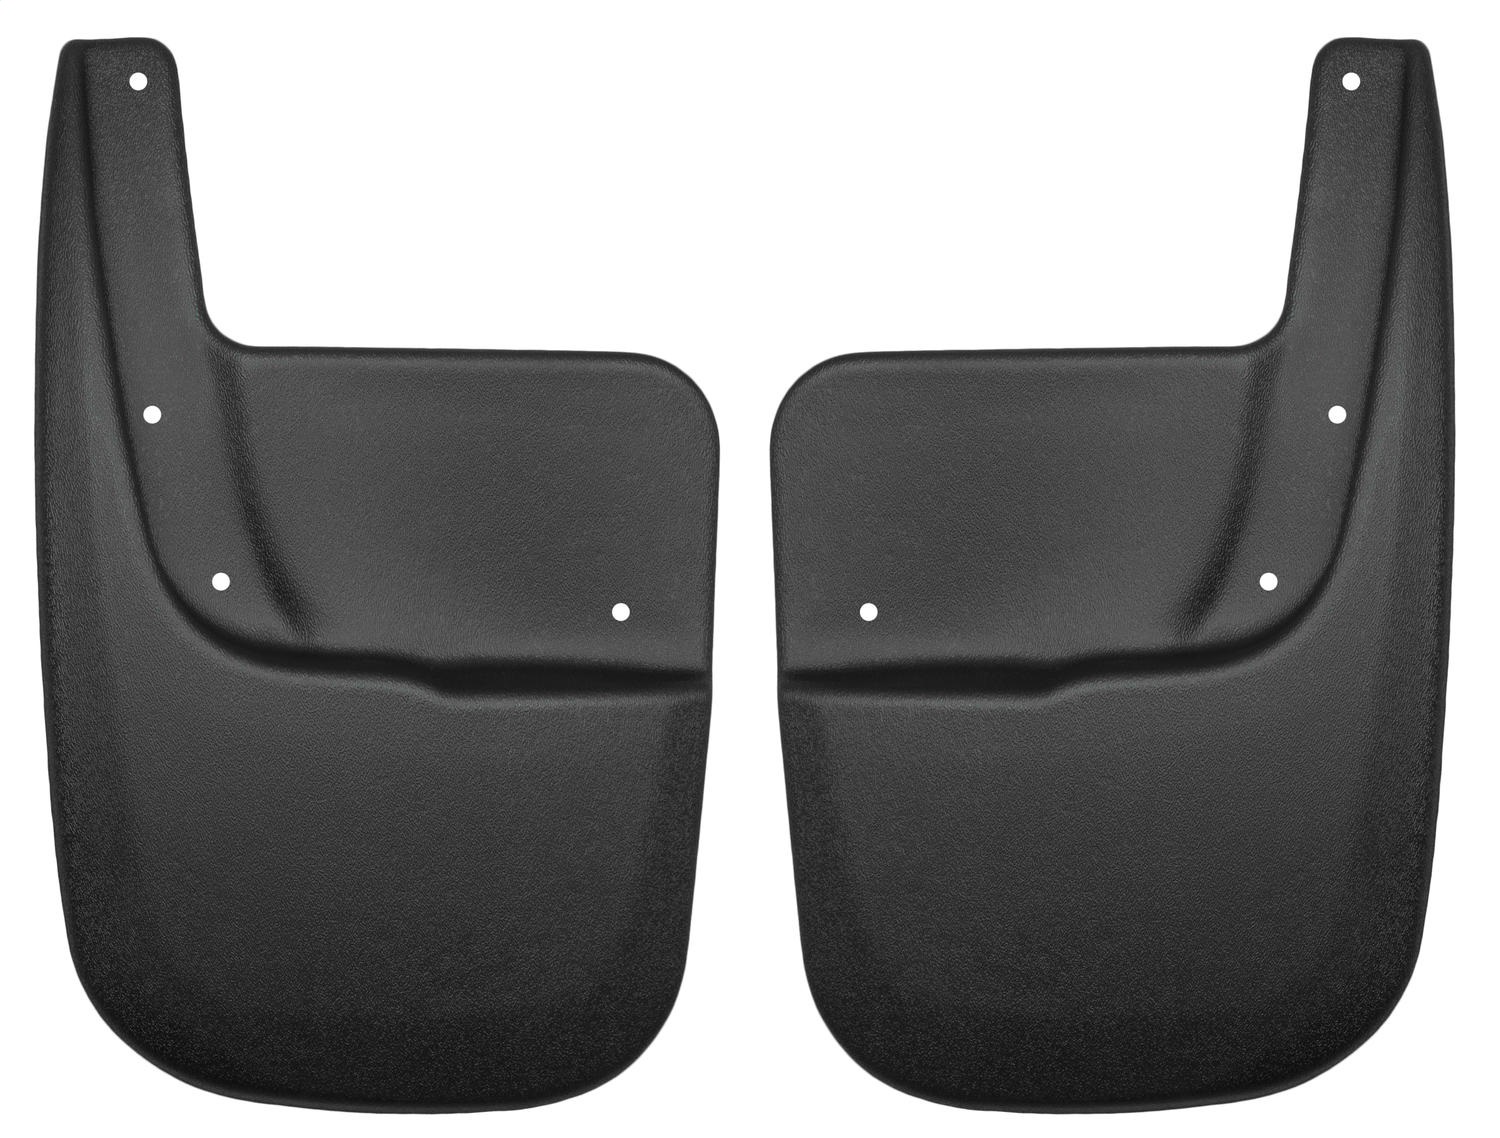 Husky Liners 57631 Custom Molded Mud Guards Fits 07-17 Expedition